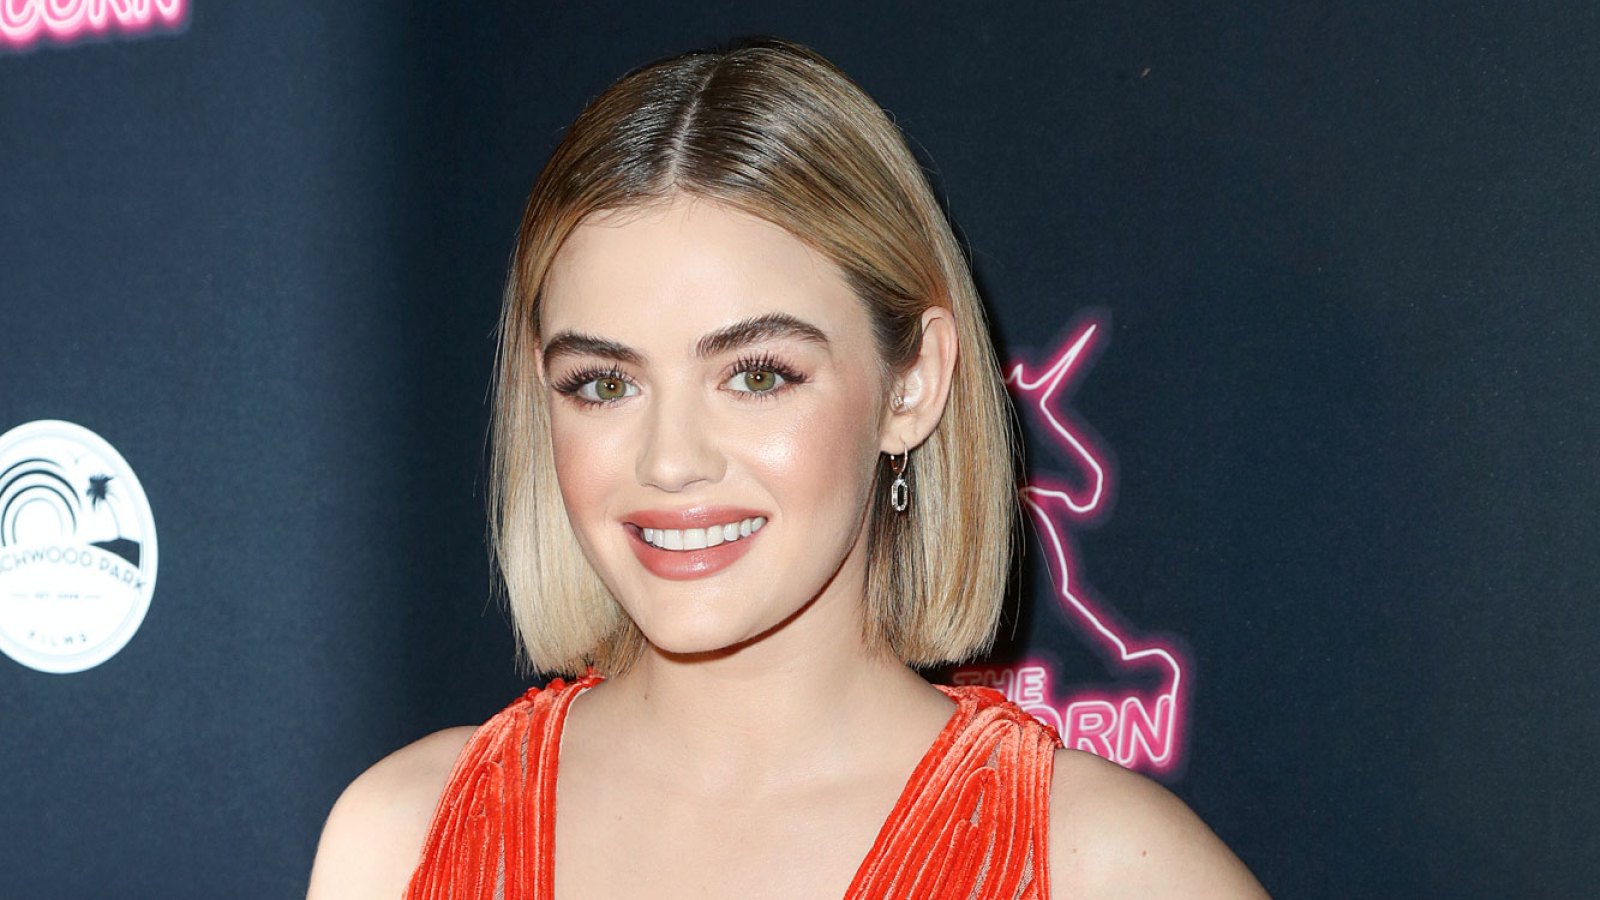 Lucy Hale Will Lead Riverdale's 'Katy Keene Spinoff